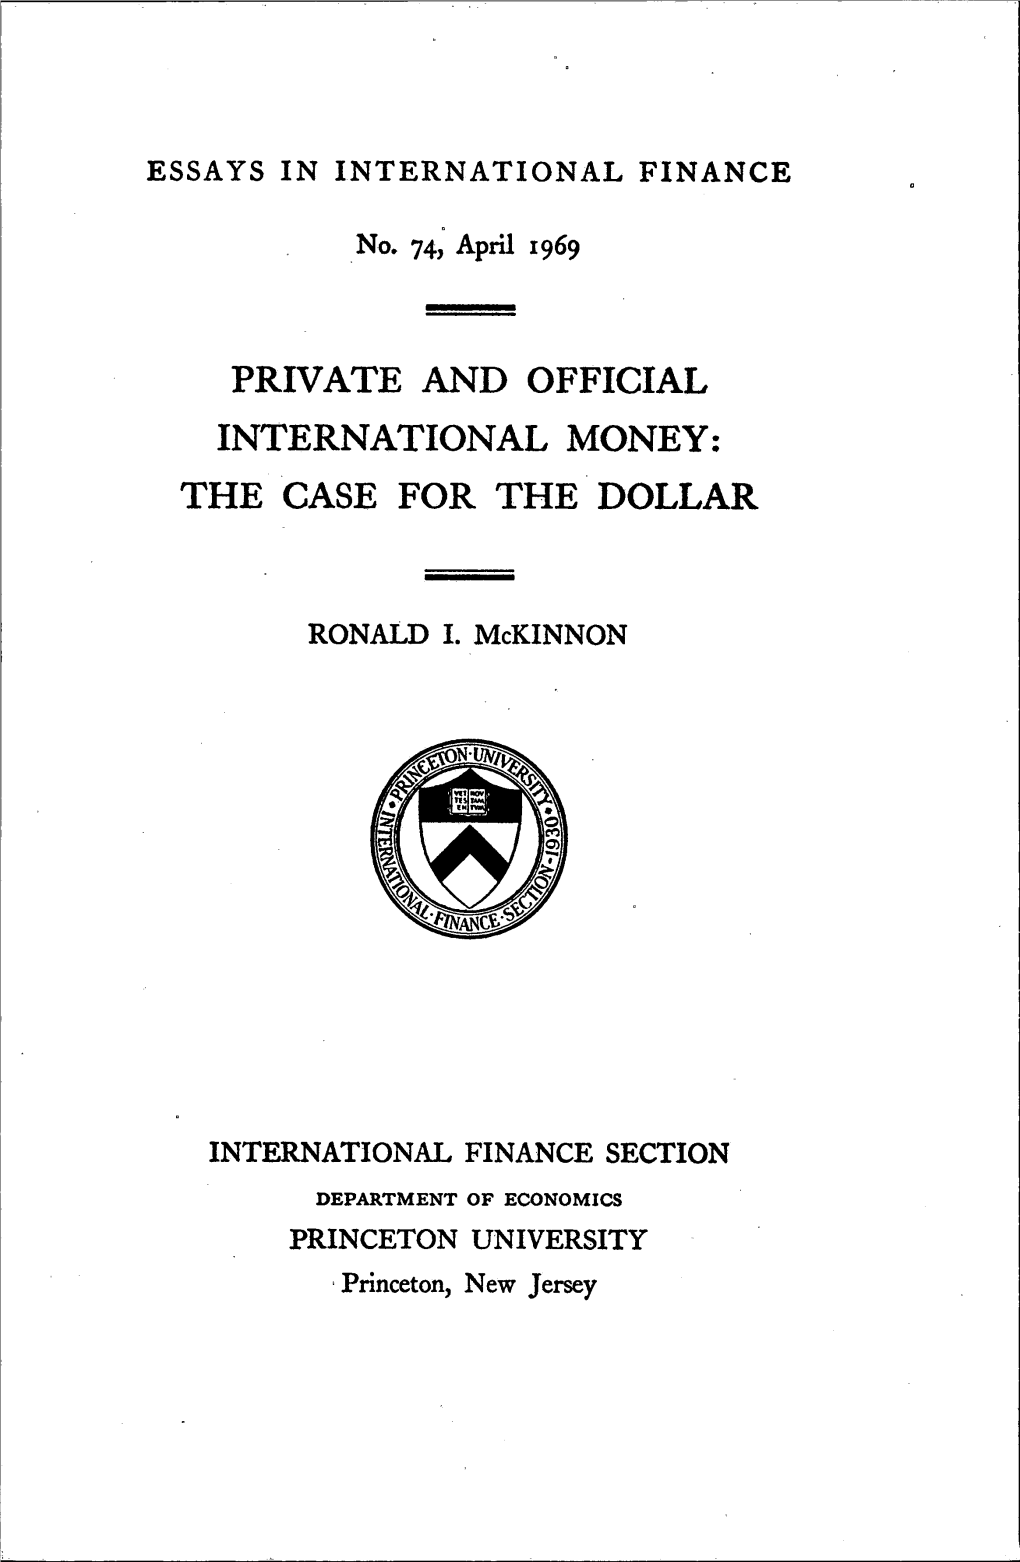 Private and Official International Money: the Case for the Dollar